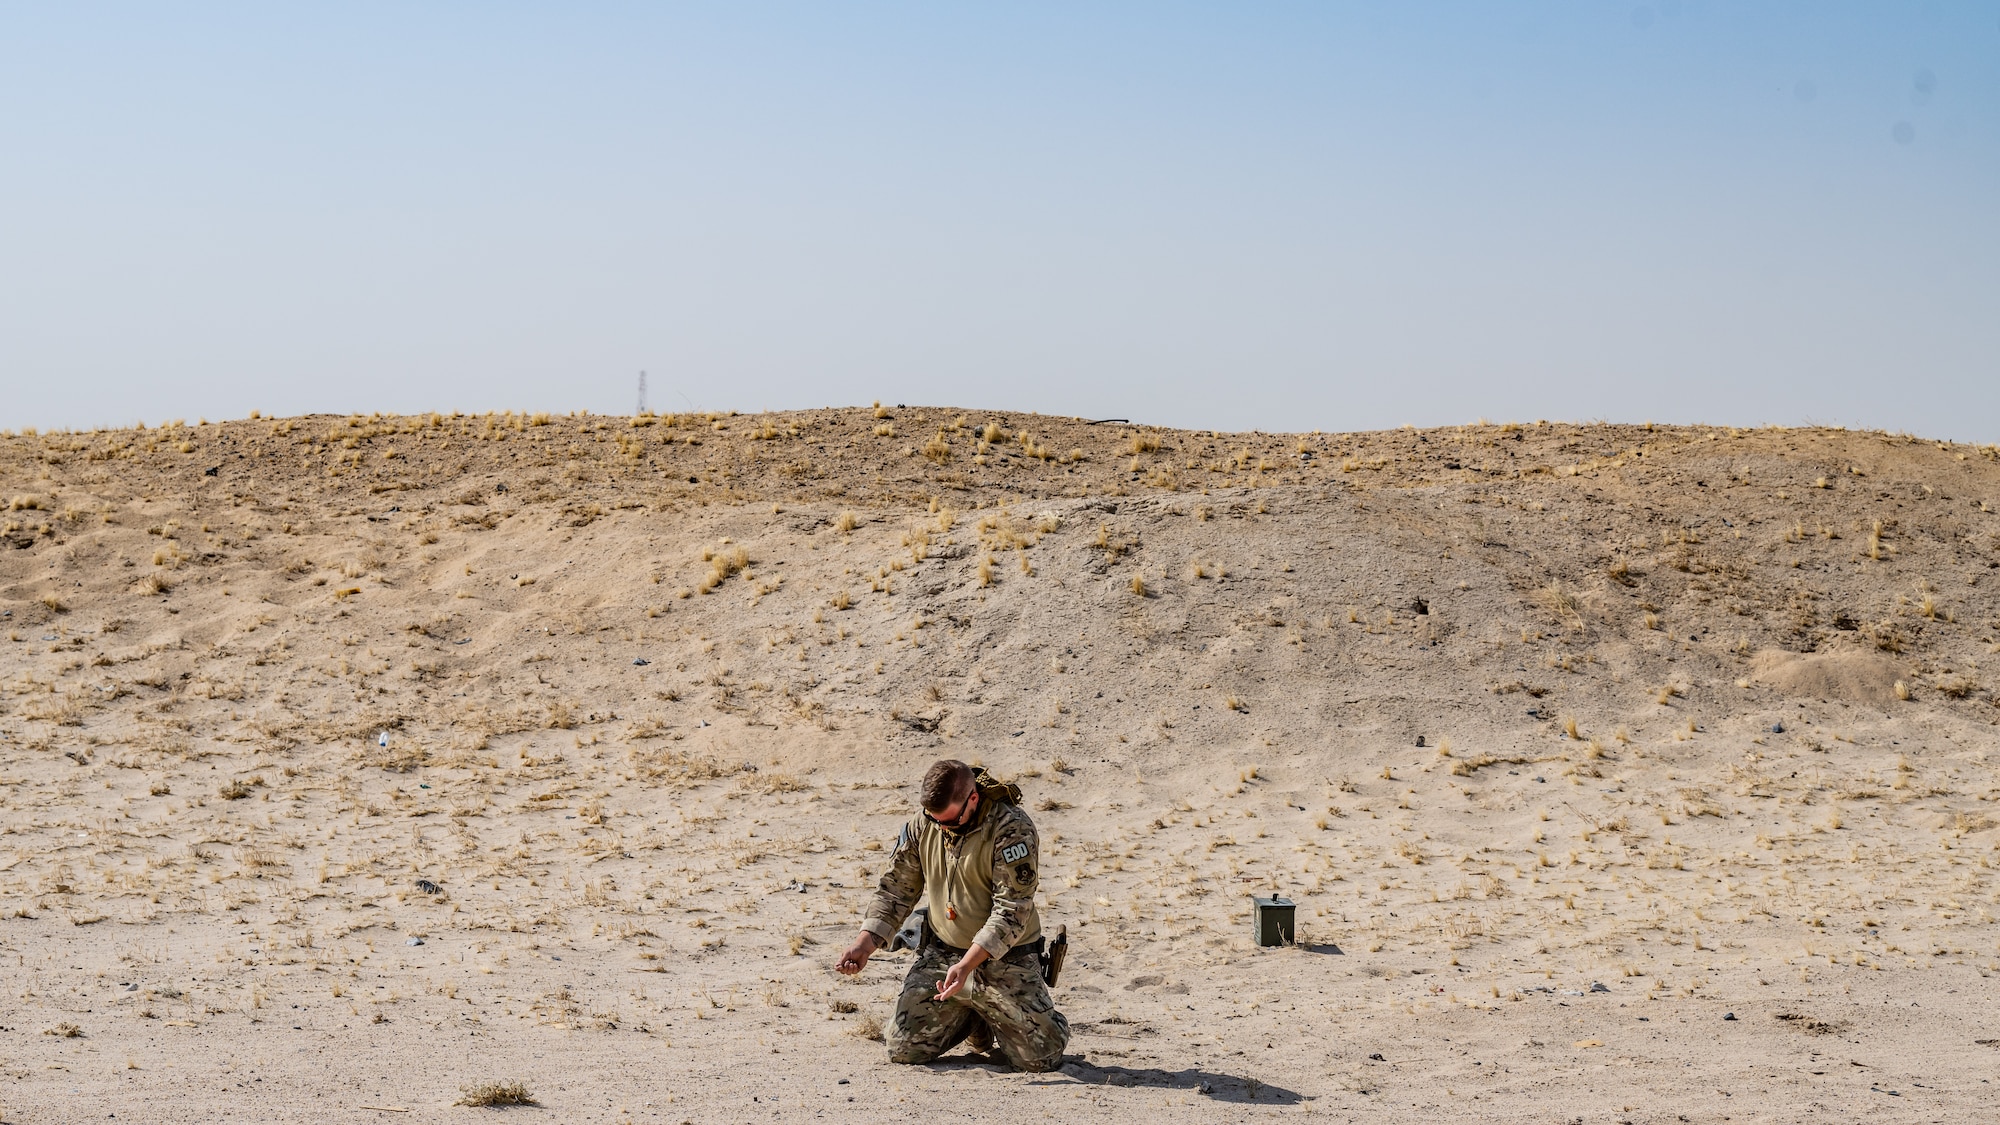 A U.S. Air Force explosive ordnance disposal (EOD) technician assigned to the 386th Expeditionary Civil Engineer Squadron lays out a detonation cord near Ali Al Salem Air Base, Kuwait, July 21, 2023. EOD technicians are experts in the safe handling and destruction of chemical, biological, incendiary, radiological and nuclear materials and devices, and they help ensure freedom of operations by removing such hazards. (U.S. Air Force photo by Staff Sgt. Kevin Long)